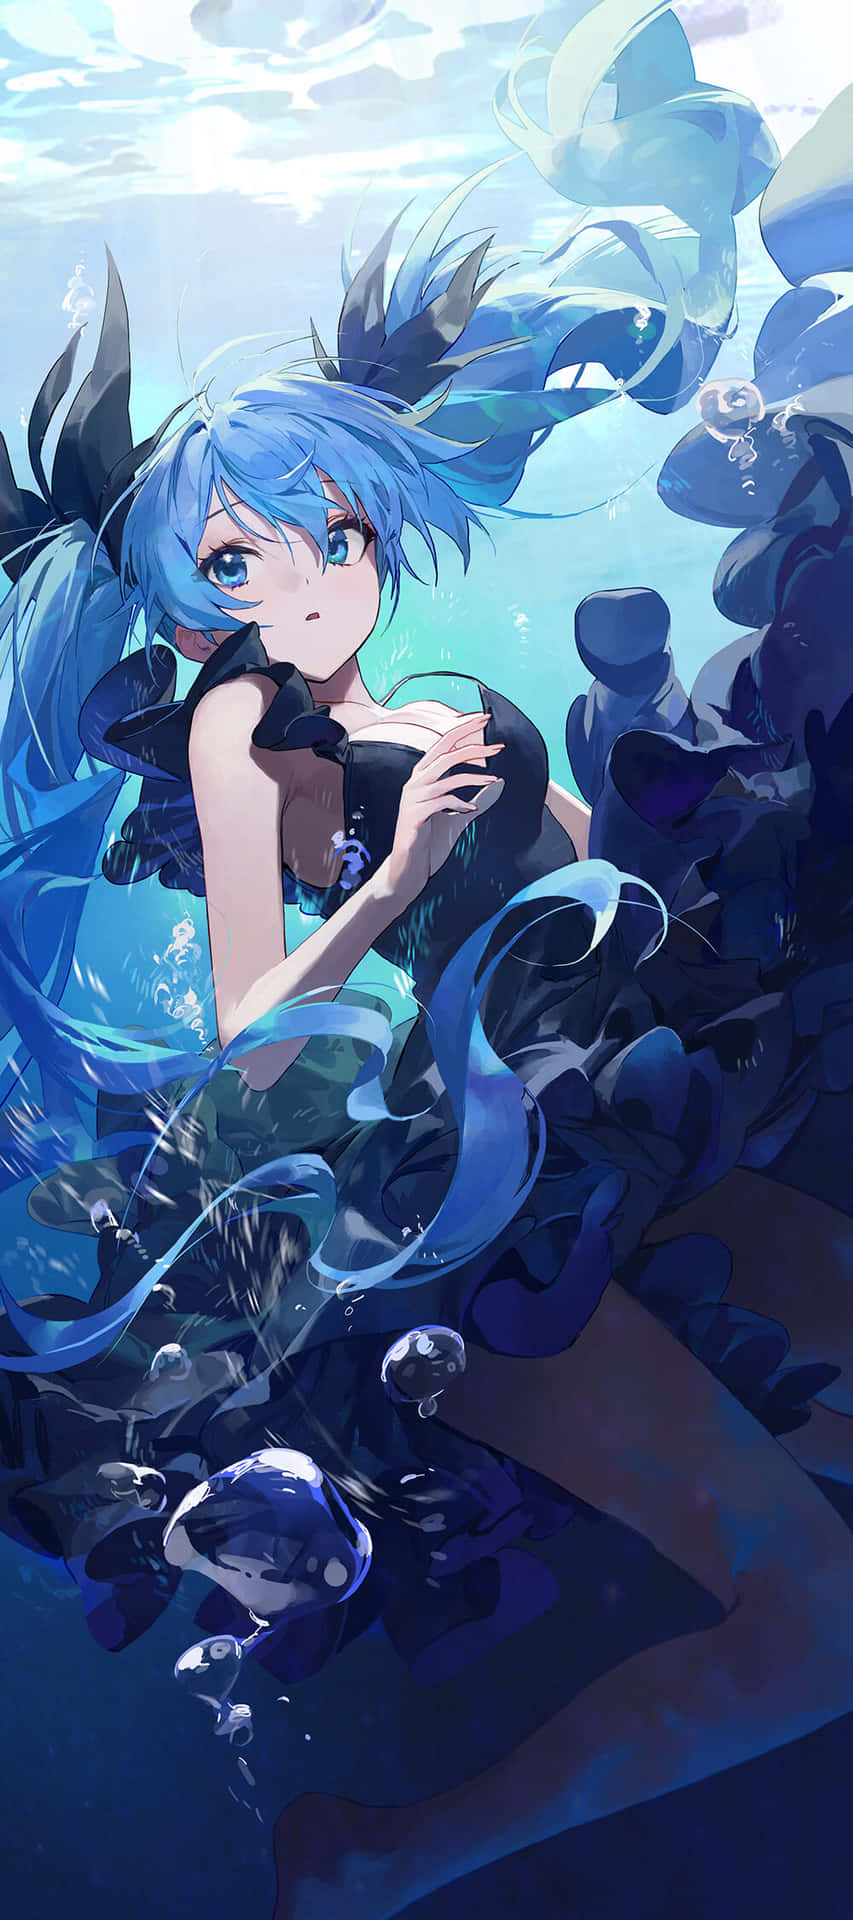 “Discover the World of Hatsune Miku With This Innovative Phone!” Wallpaper